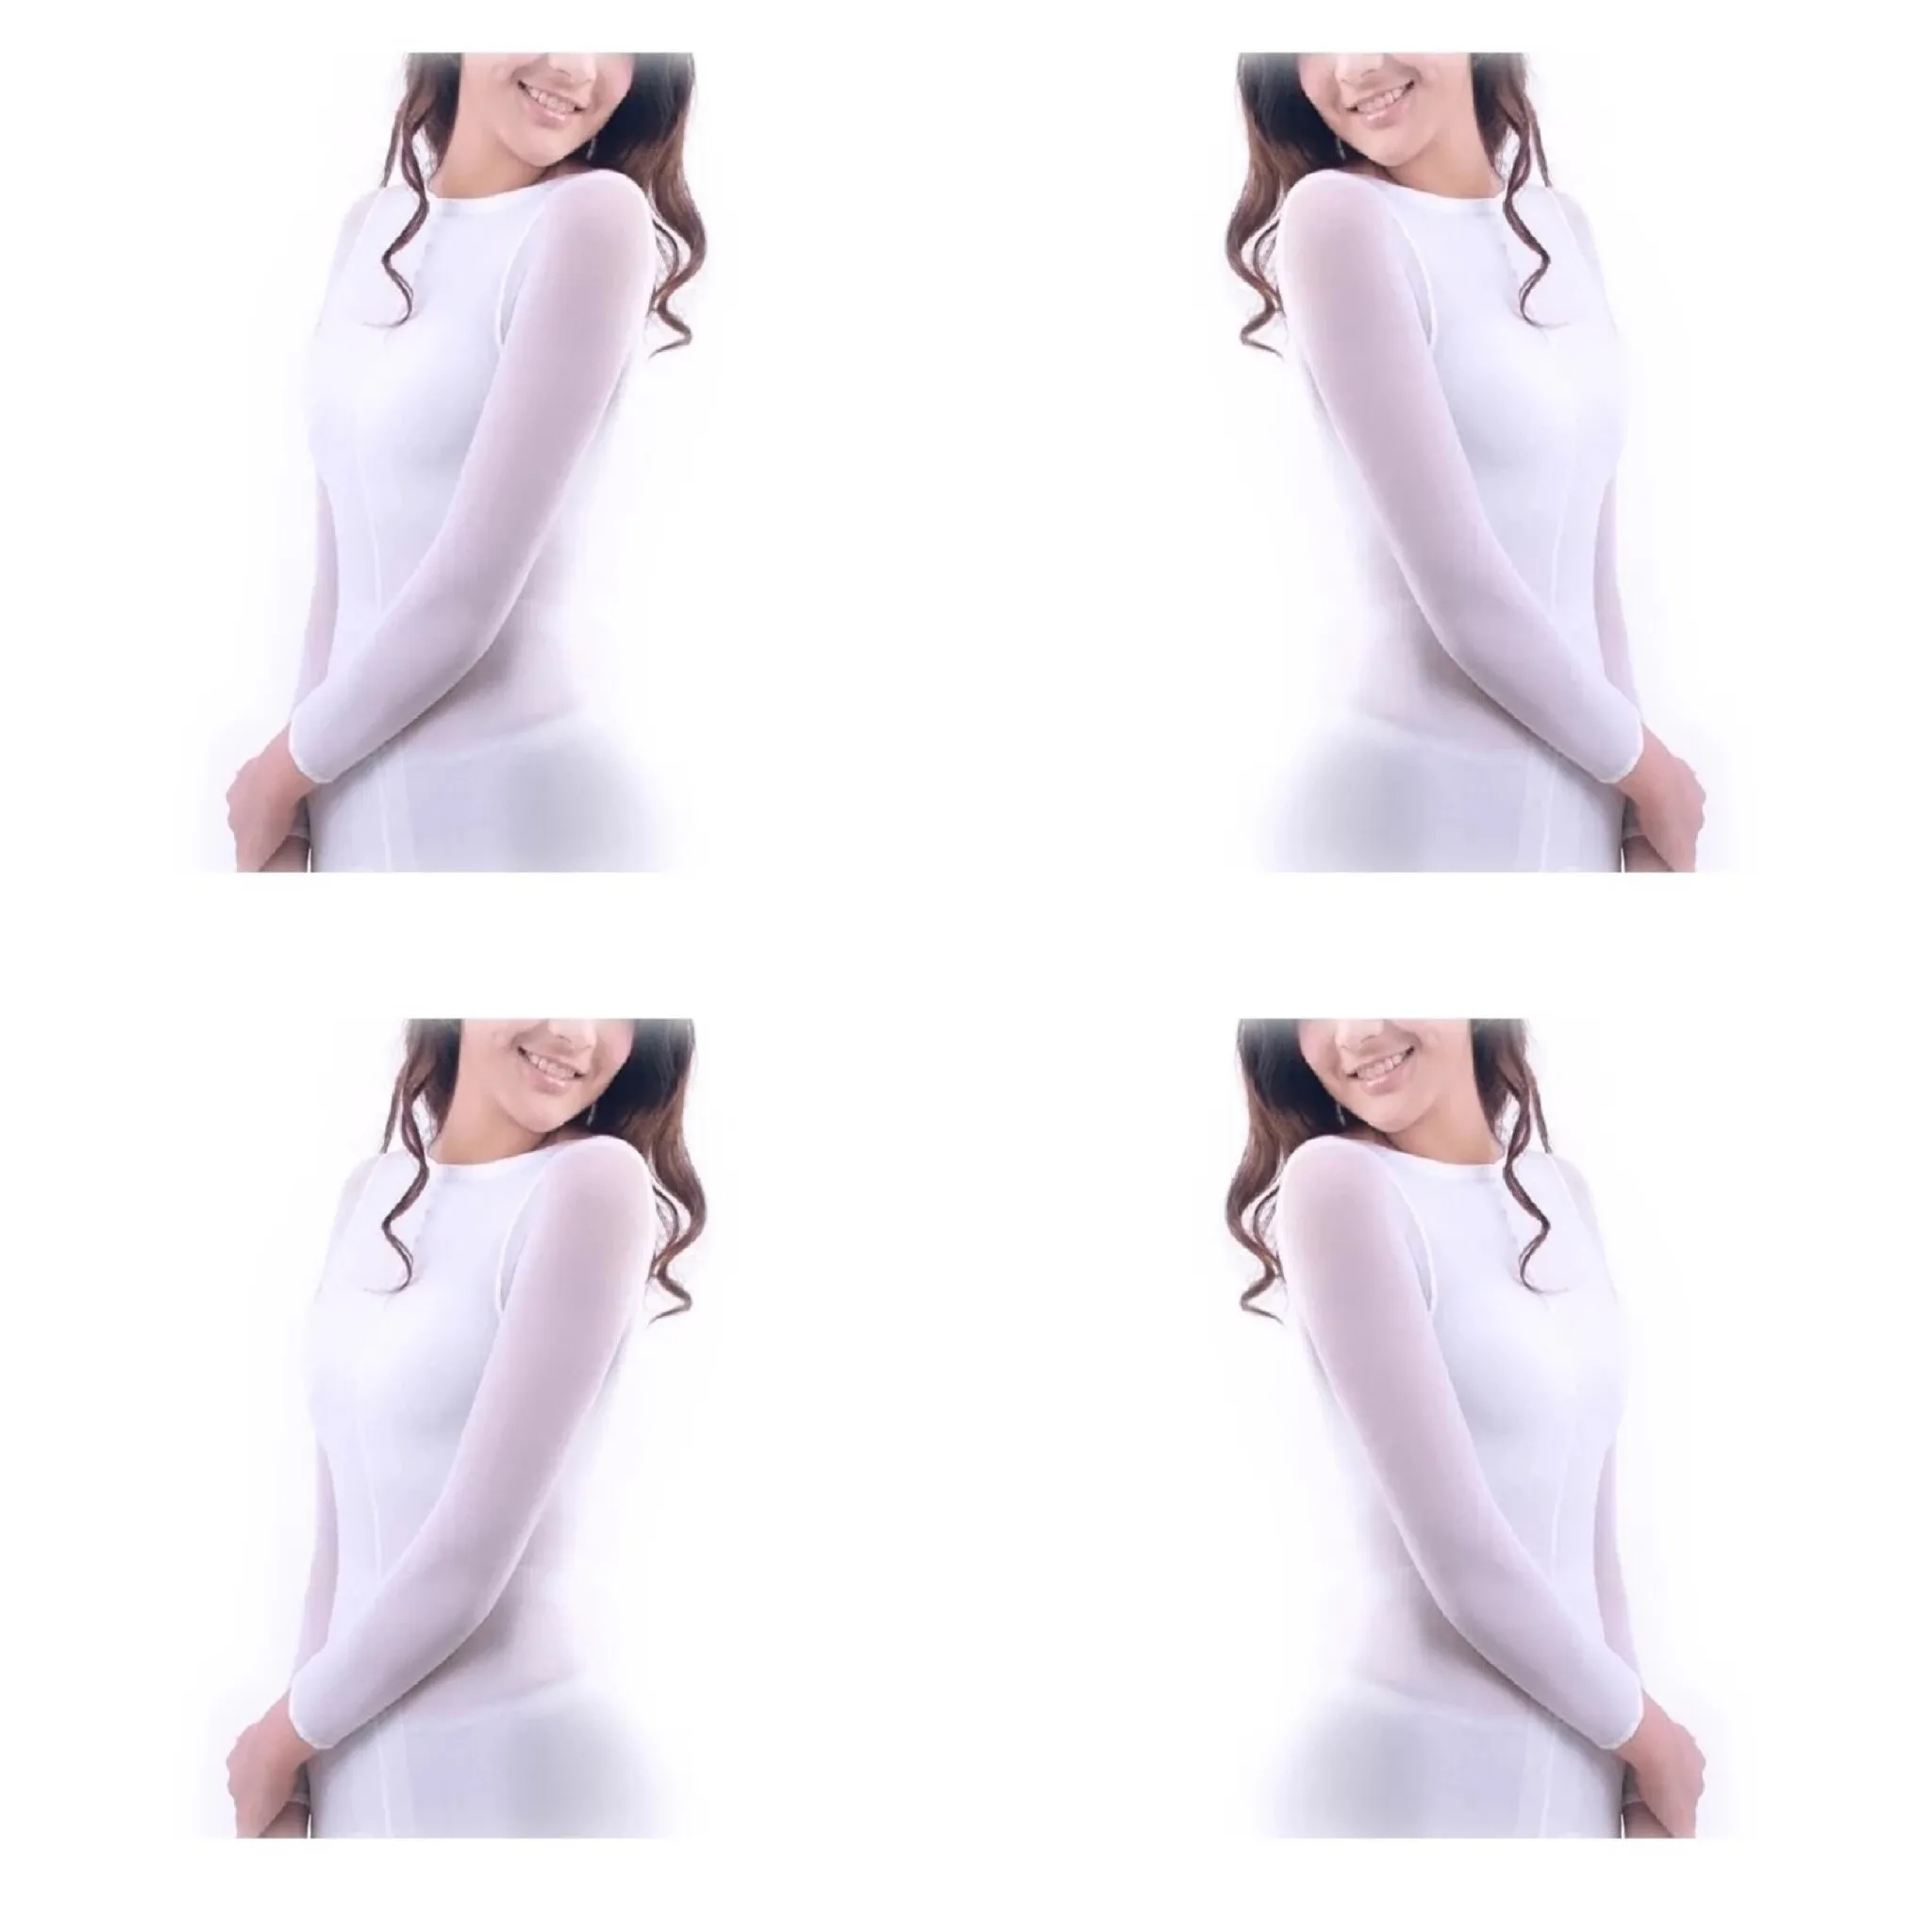 White Slim Fit Disposable Massage Bodysuit For Cellulite Treatment Nylon  Spandex Crotchless Body Suit With In M,L, XL, And XXL Sizes From  Itechbeauty, $10.98